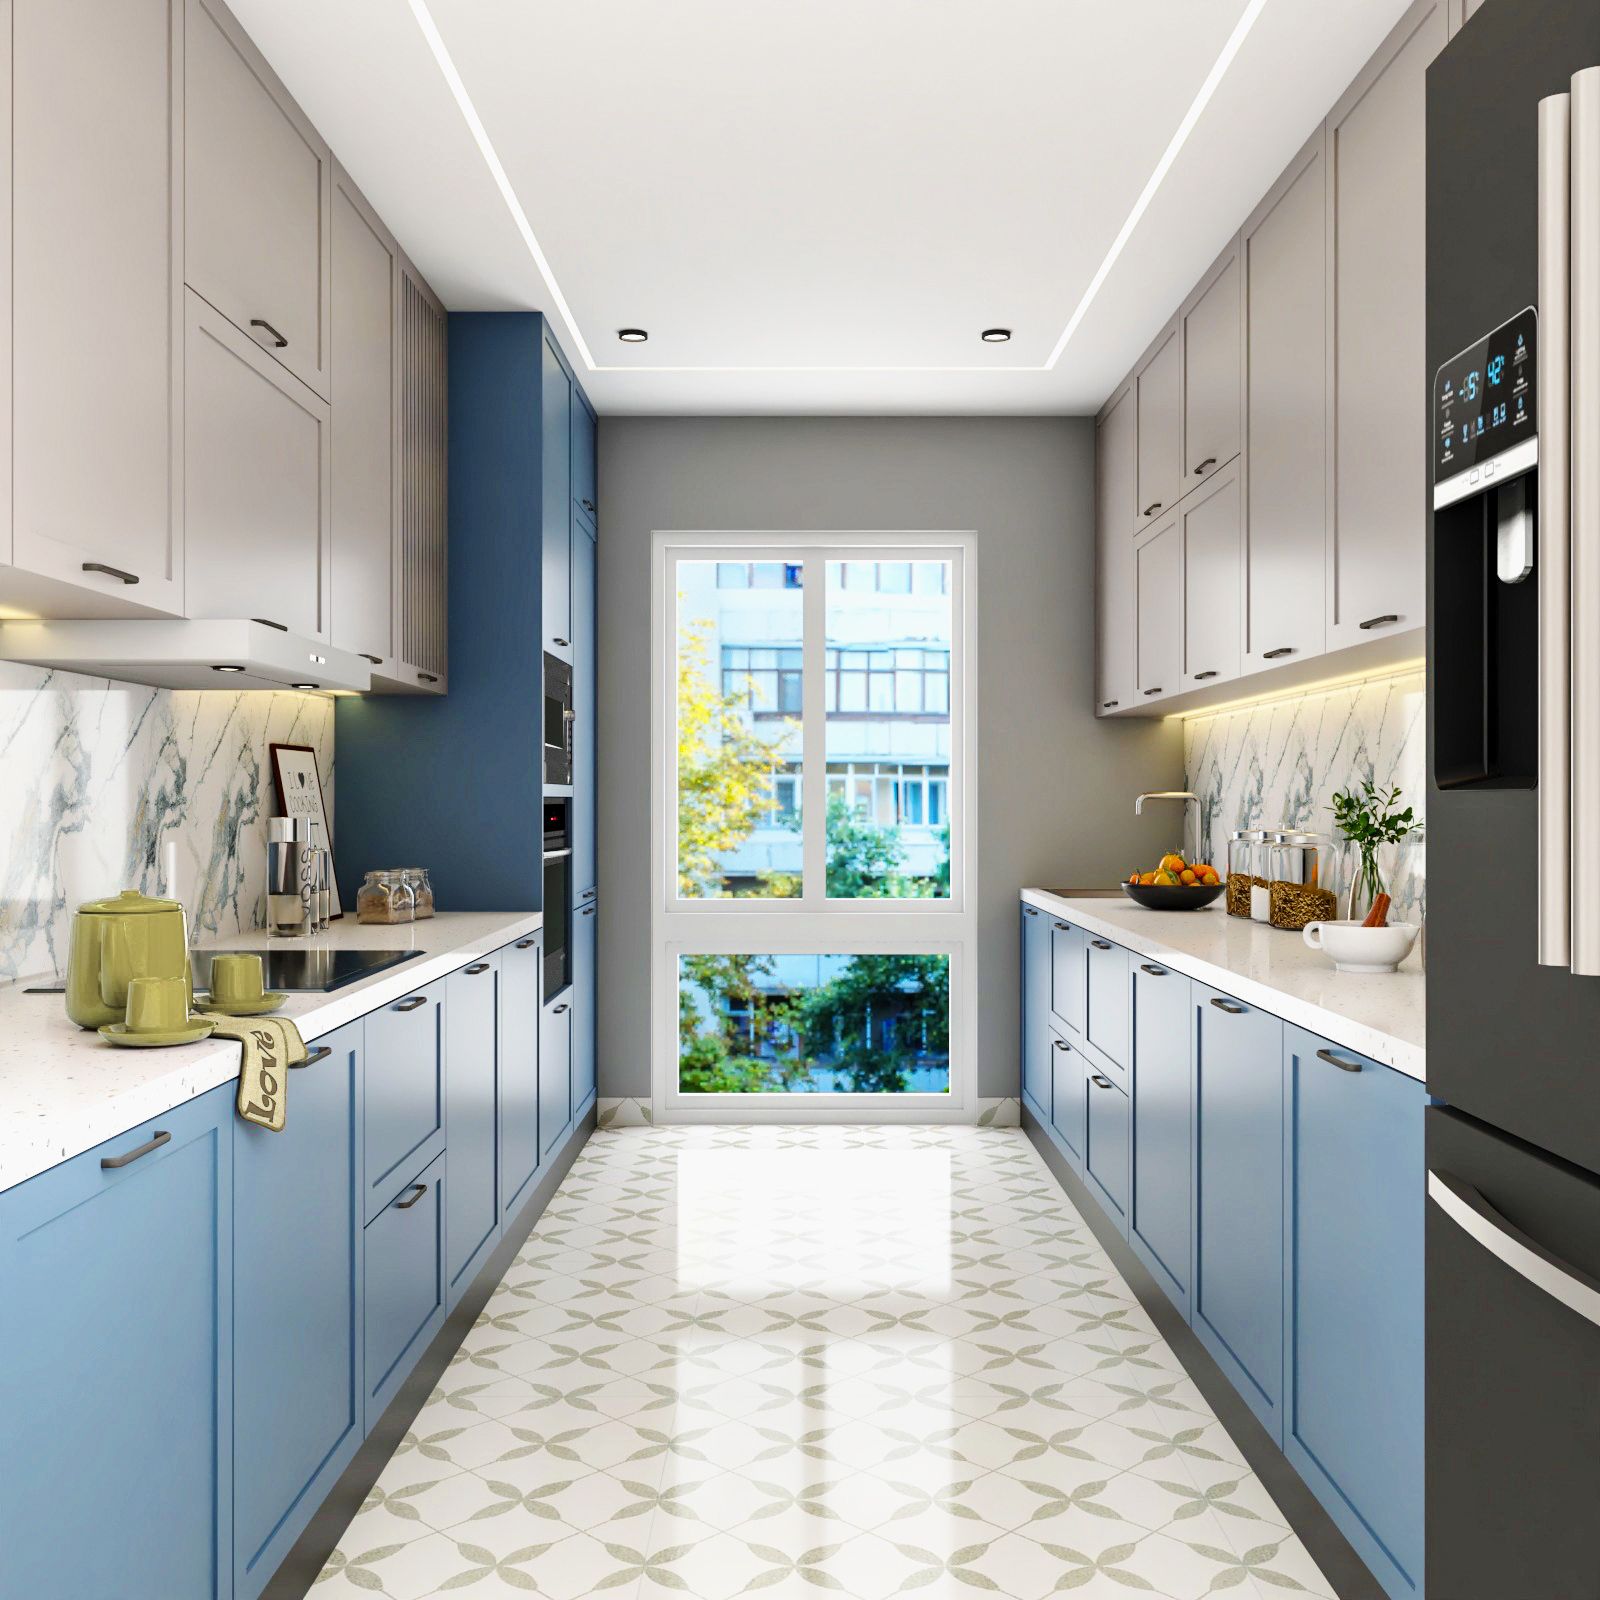 Modern Parallel Modular Kitchen Design With Cielo Blue And Beige Cabinetry